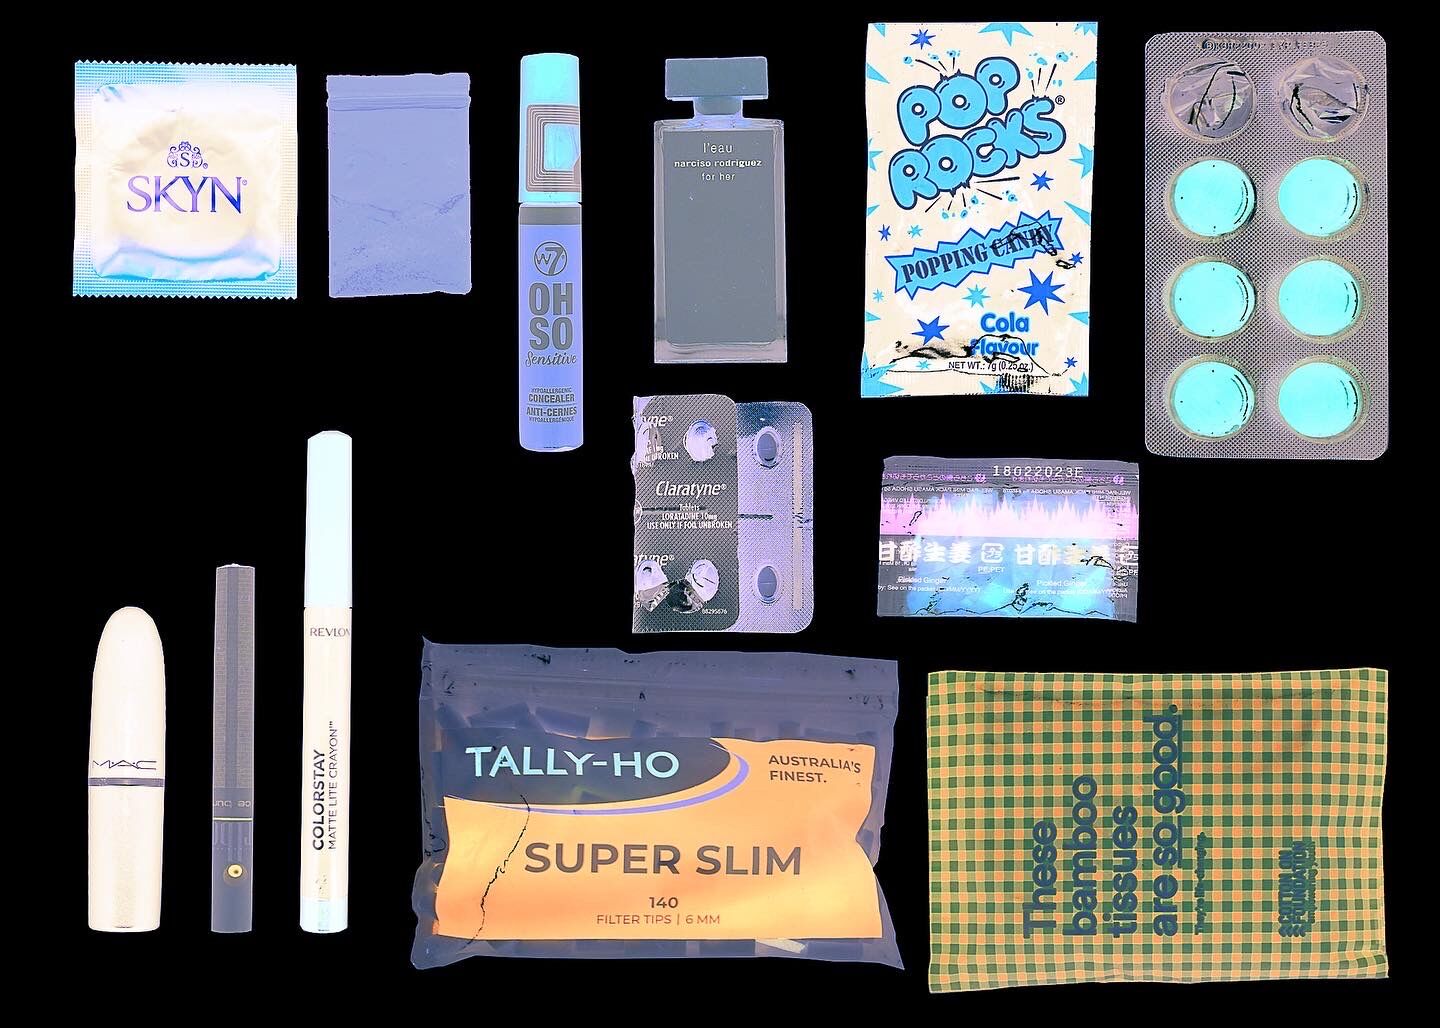 A collection of items including contraceptives, makeup, medication, candy, and rolling paper filters, displayed on a black background.